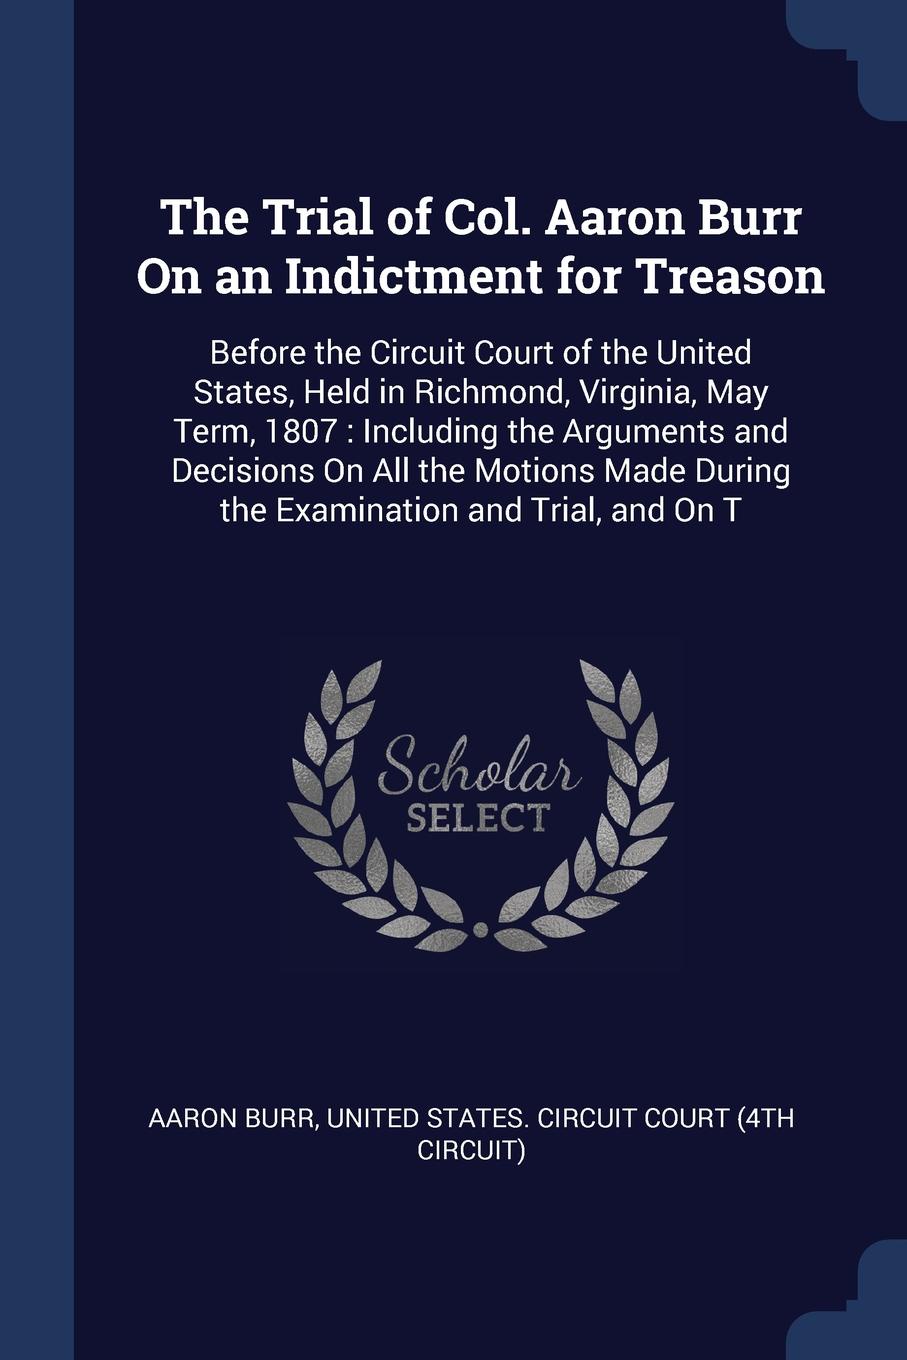 The Trial of Col. Aaron Burr On an Indictment for Treason. Before the Circuit Court of the United States, Held in Richmond, Virginia, May Term, 1807 : Including the Arguments and Decisions On All the Motions Made During the Examination and Trial, ...